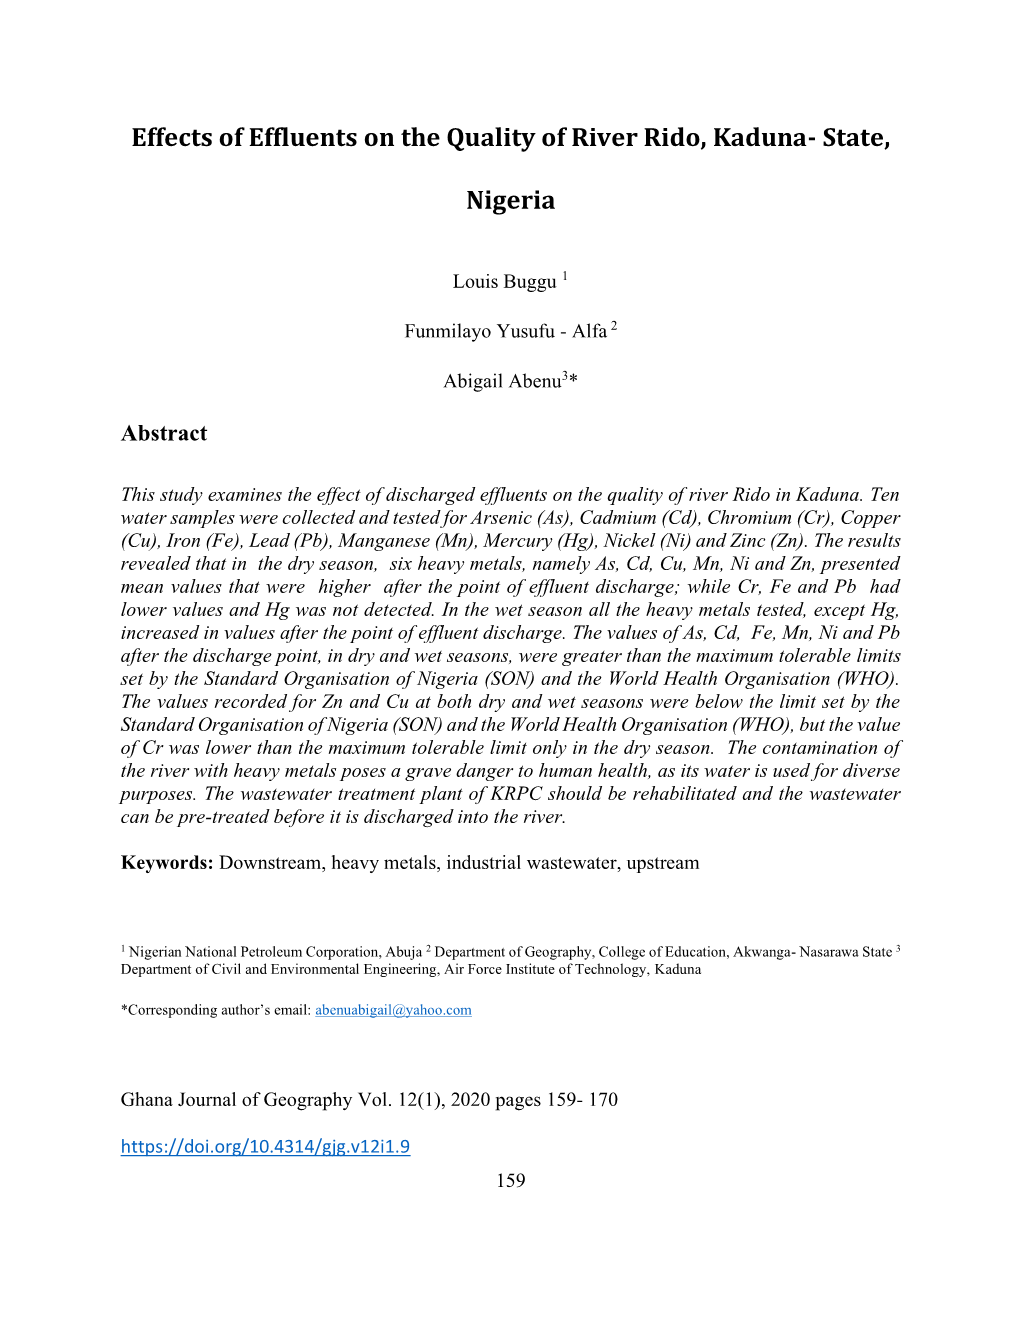 Effects of Effluents on the Quality of River Rido, Kaduna- State, Nigeria